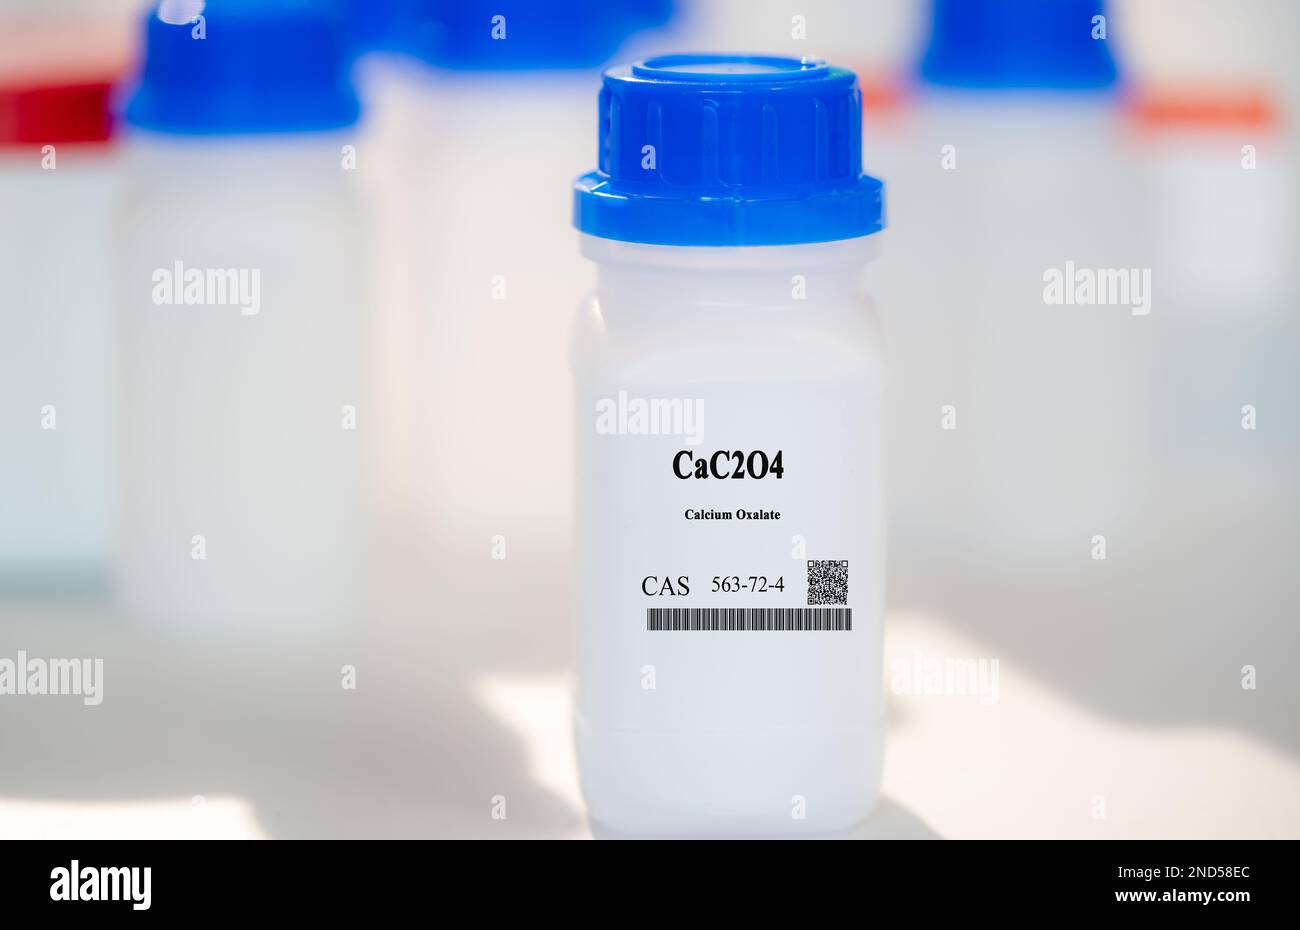 CaC2O4 calcium oxalate CAS 563-72-4 chemical substance in white plastic laboratory packaging Stock Photo